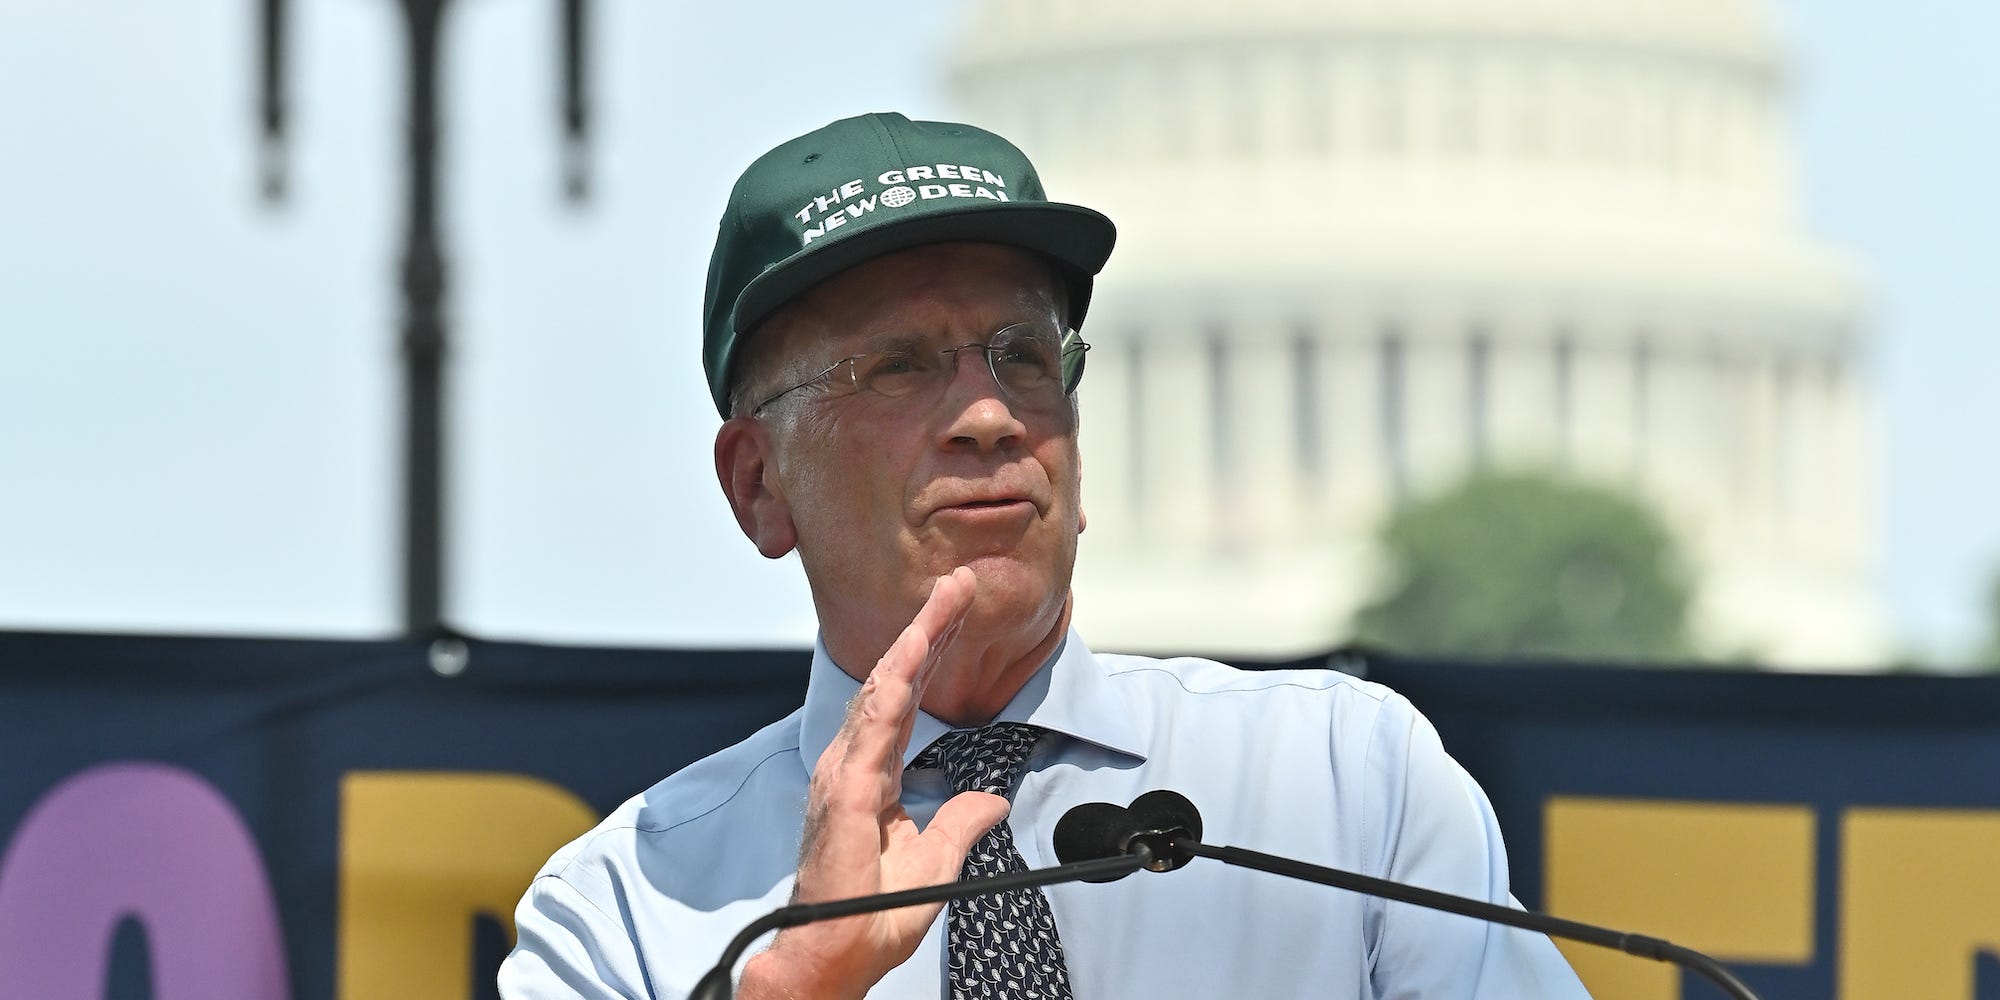 Rep. Peter Welch speaks at a climate rally on July 20, 2021 in Washington, DC.